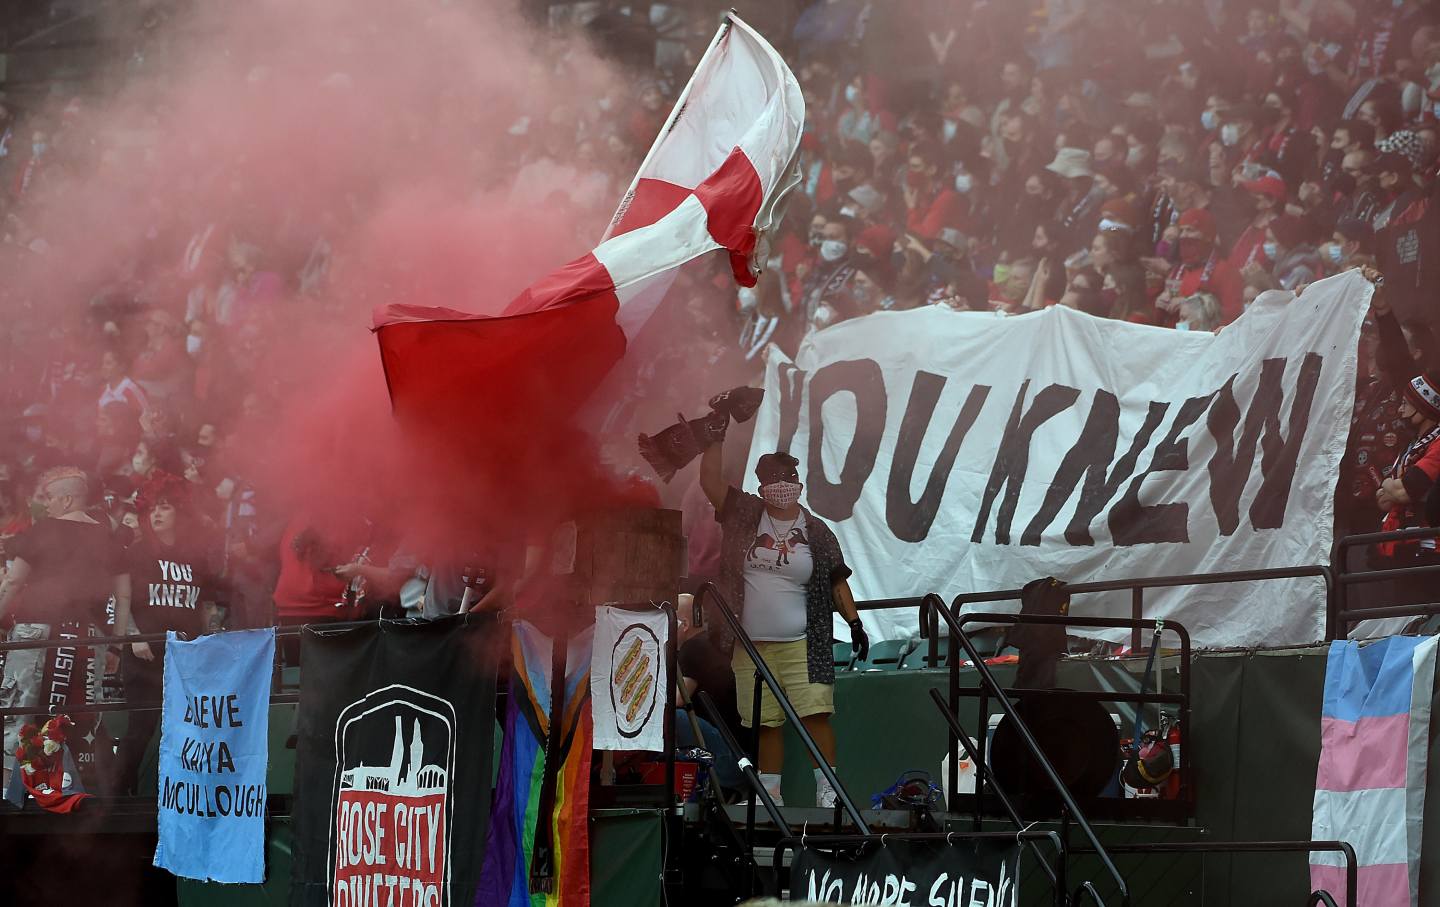 Portland Thorns women's soccer fans light a smoke bomb as part of a protest of the sex scandal in the National Women's Soccer League during a Thorns game against the Chicago Red Stars at Providence Park on November 14, 2021, in Portland, Oregon.